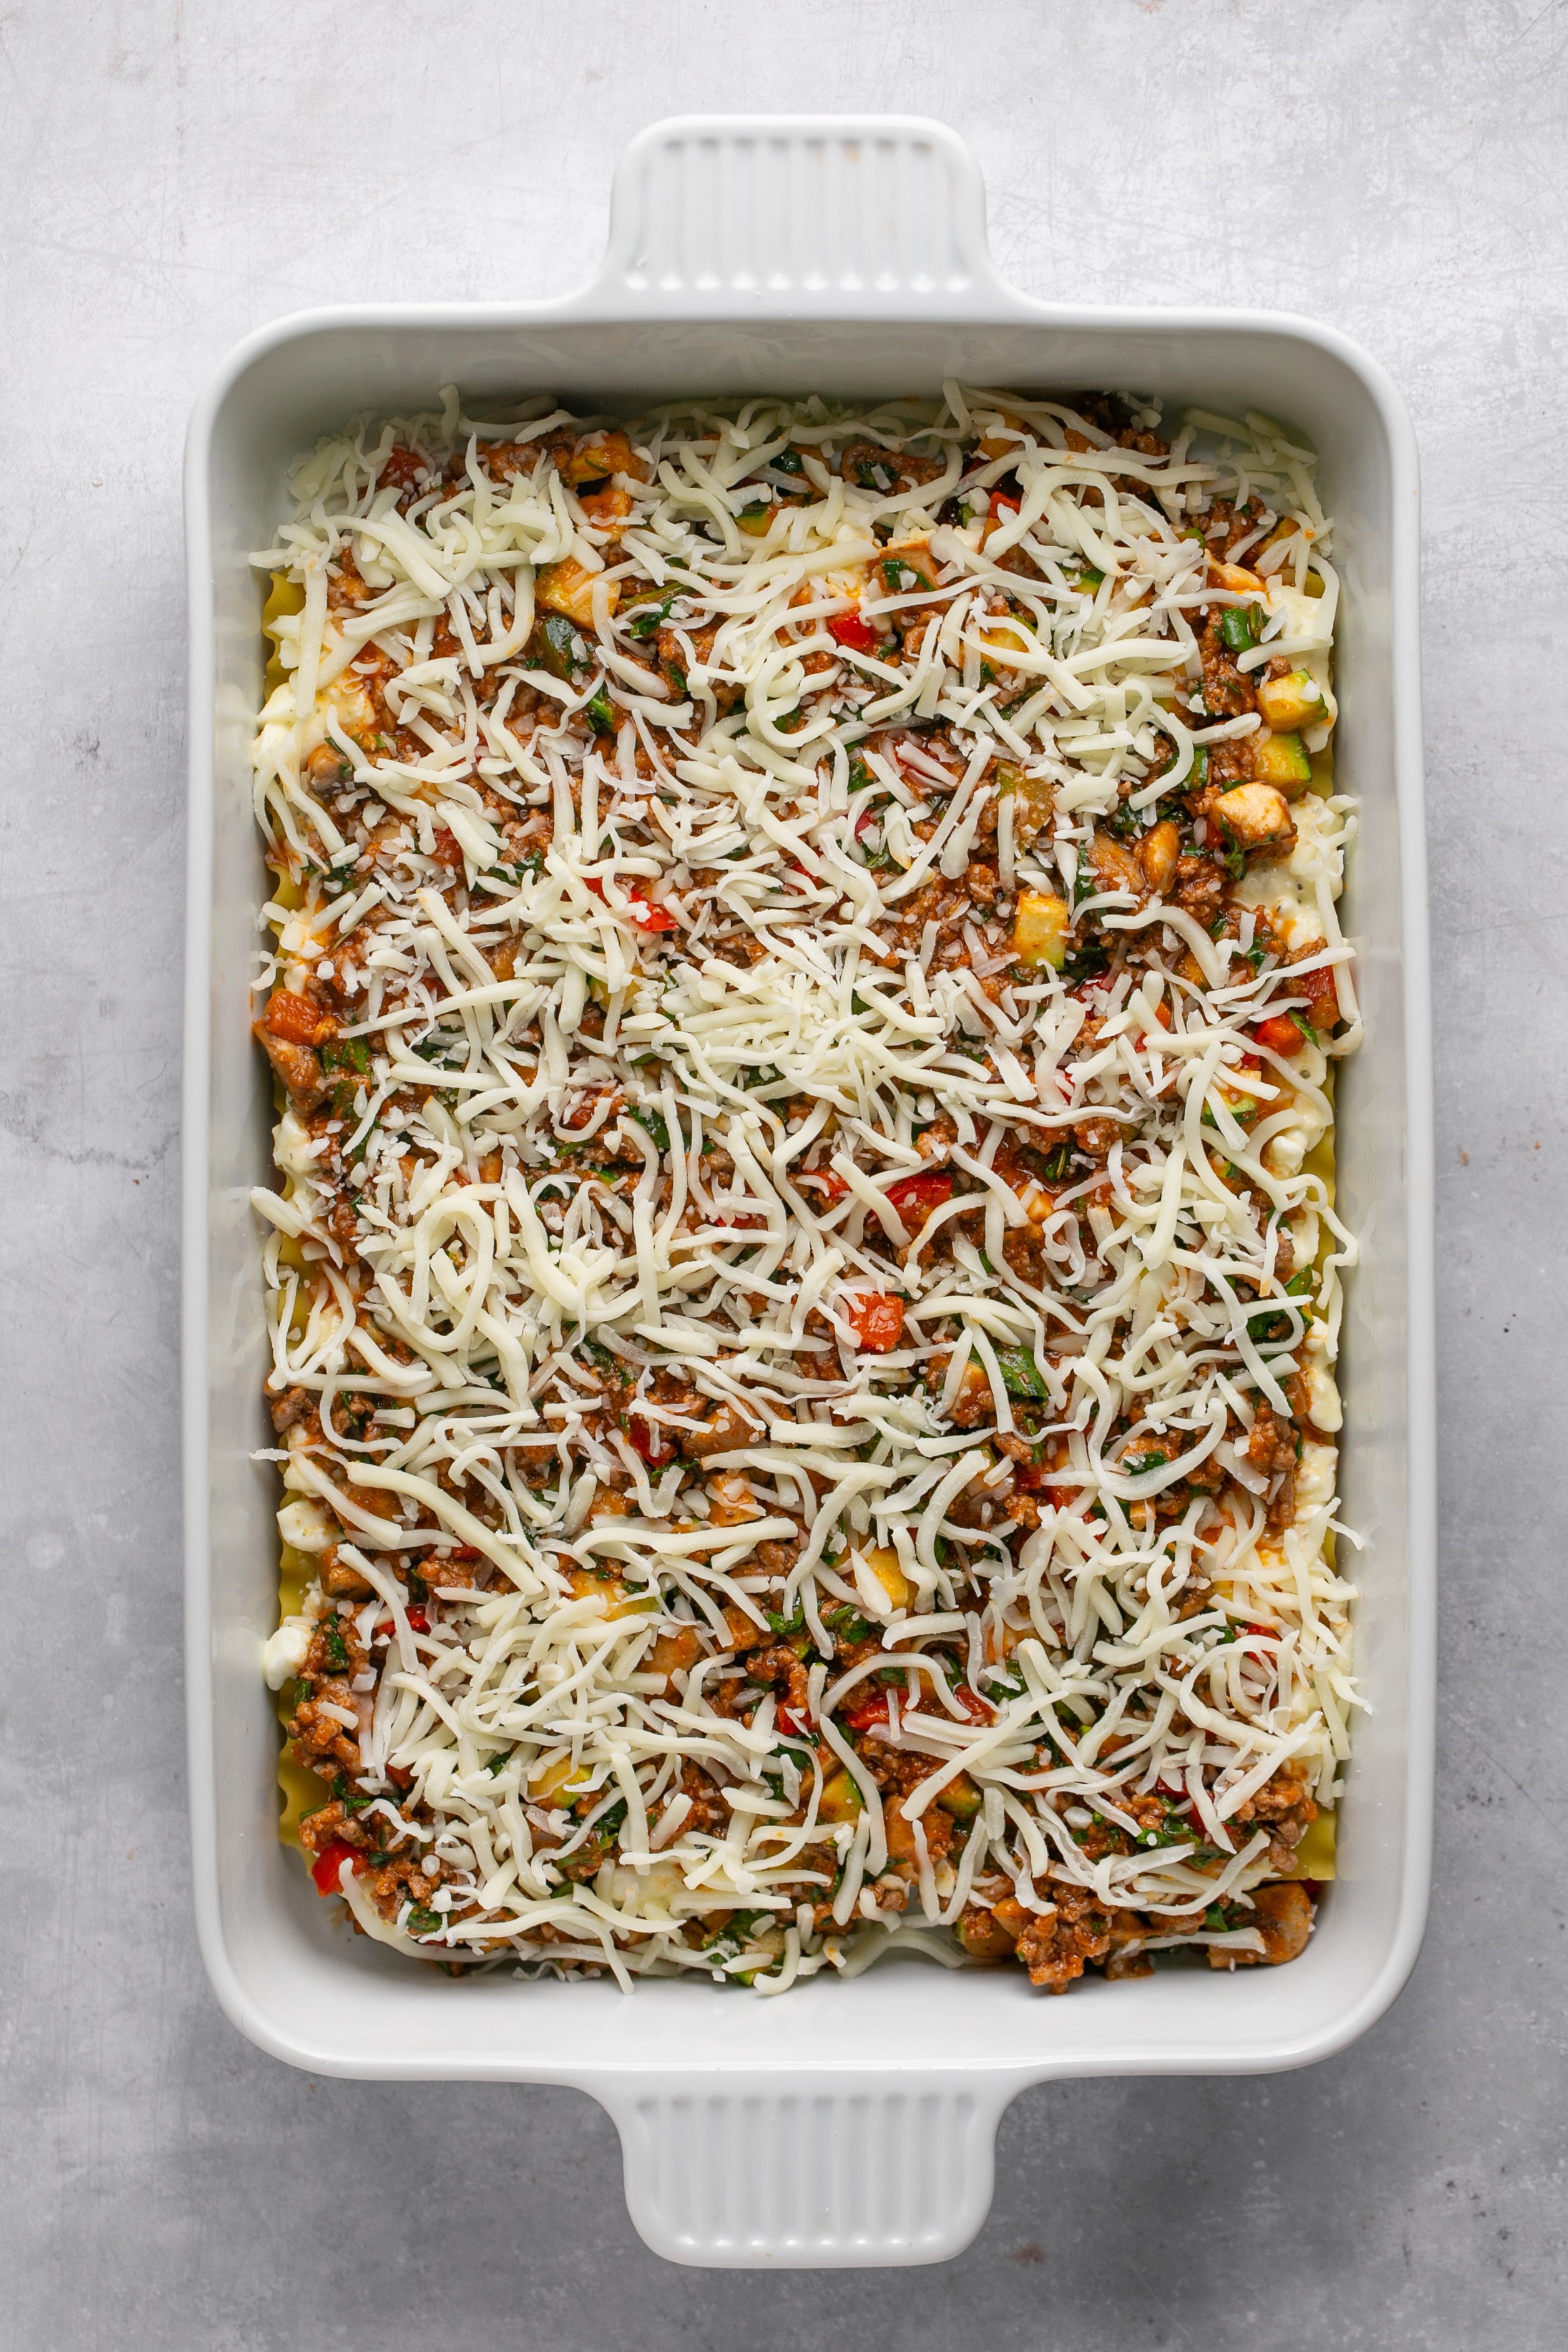 A white casserole dish filled with layers of uncooked lasagna sprinkled with shredded cheese on top.